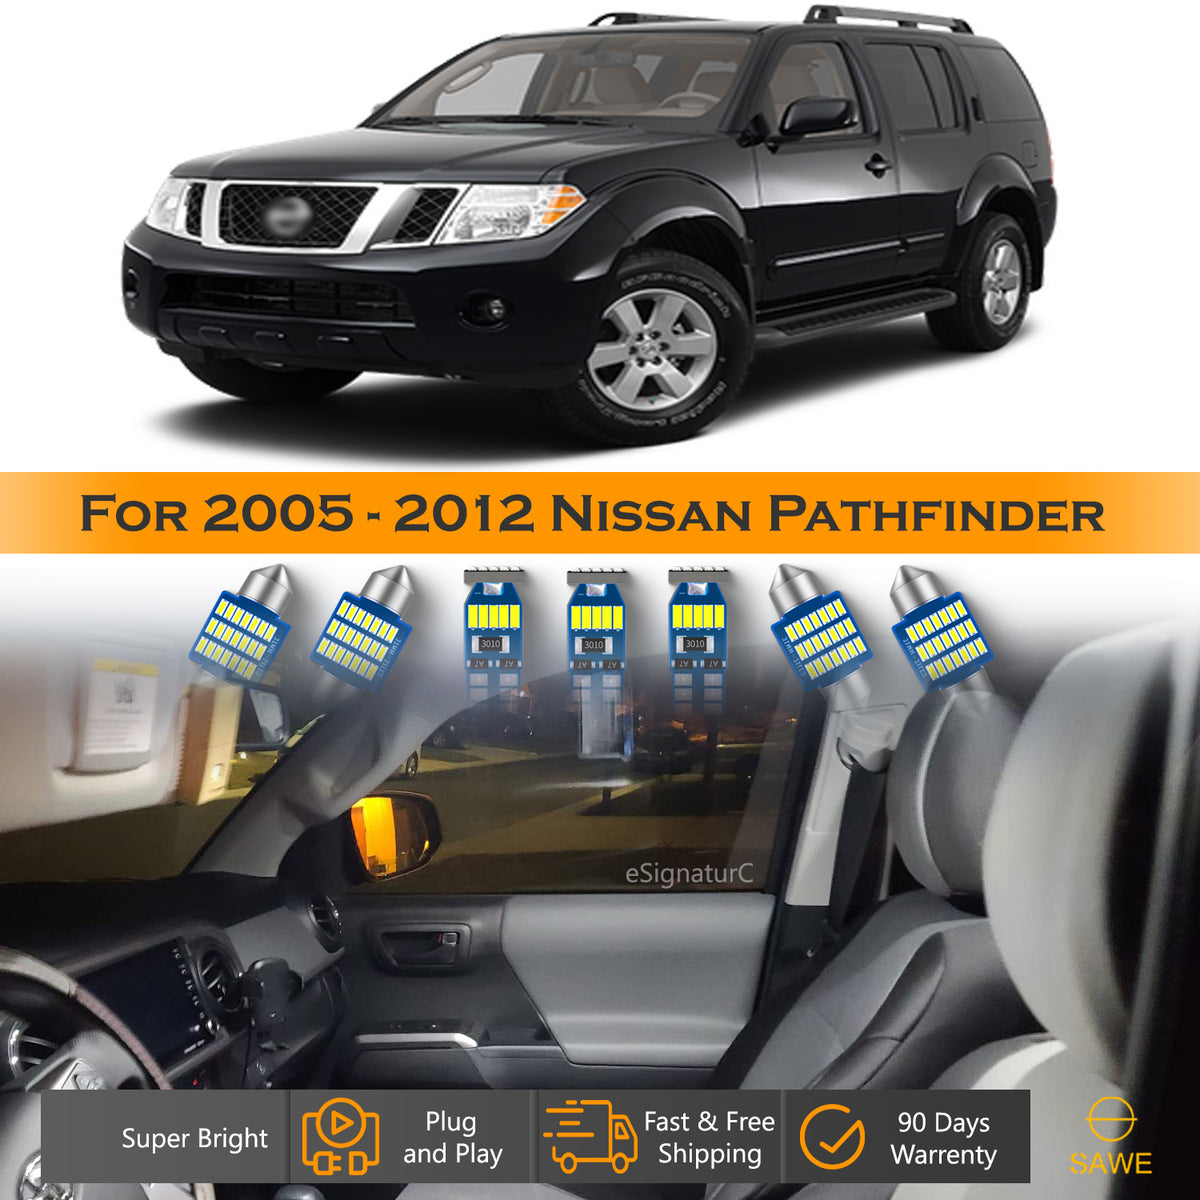 For Nissan Pathfinder Interior LED Lights - Dome & Map Light Bulbs Package Kit for 2005 - 2012 - White